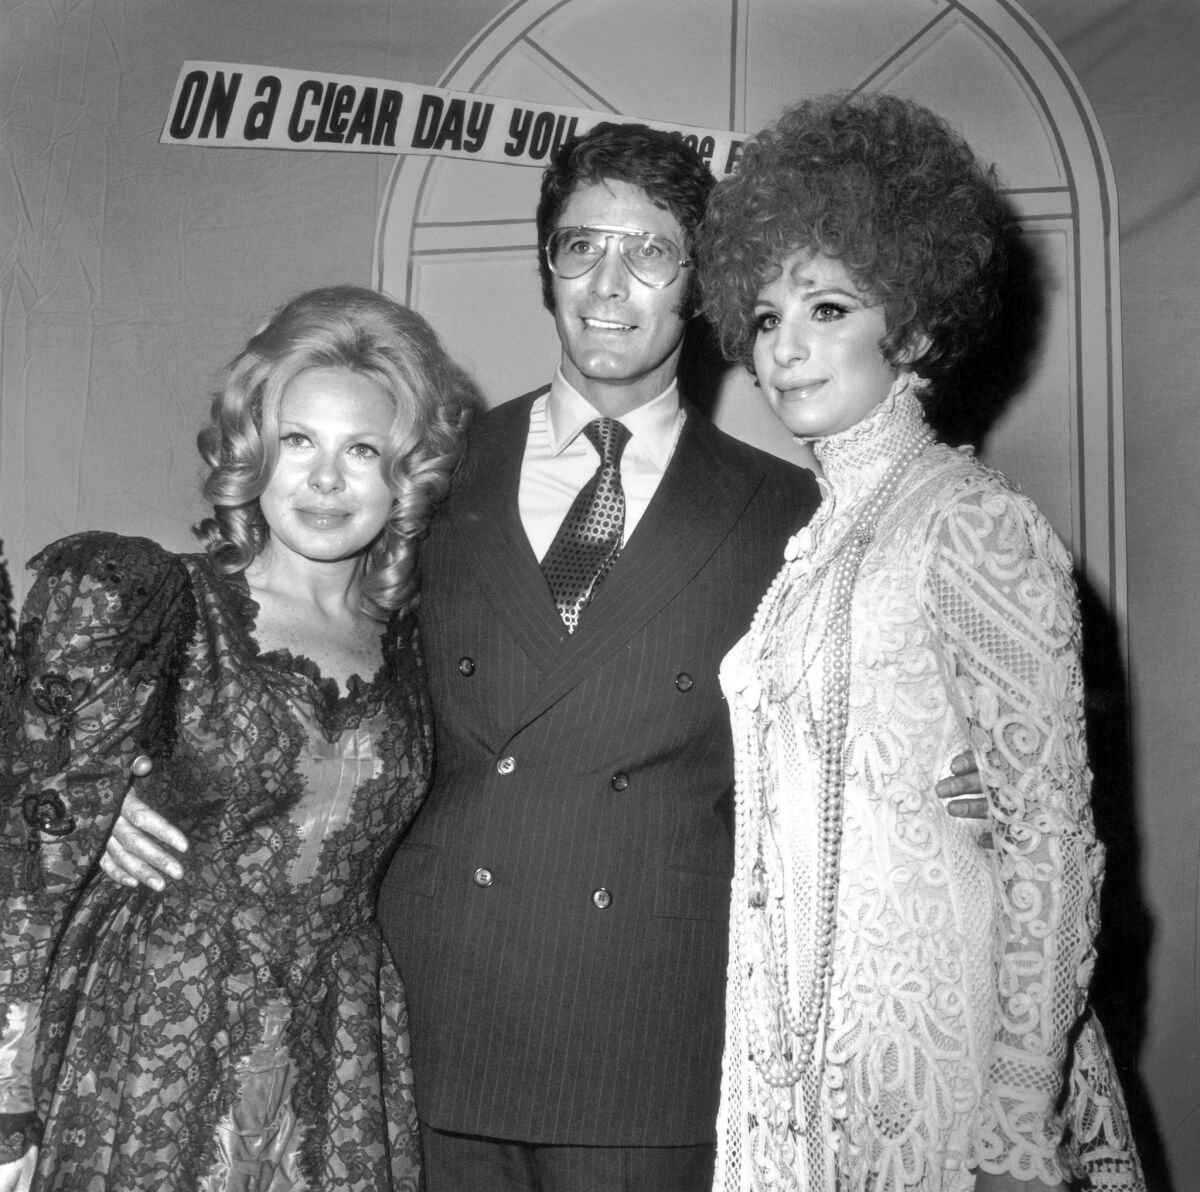 Sue Mengers, left, with Barbra Streisand and hairdresser Fred Glaser at a 1969 party for “On a Clear Day You Can See Forever.”